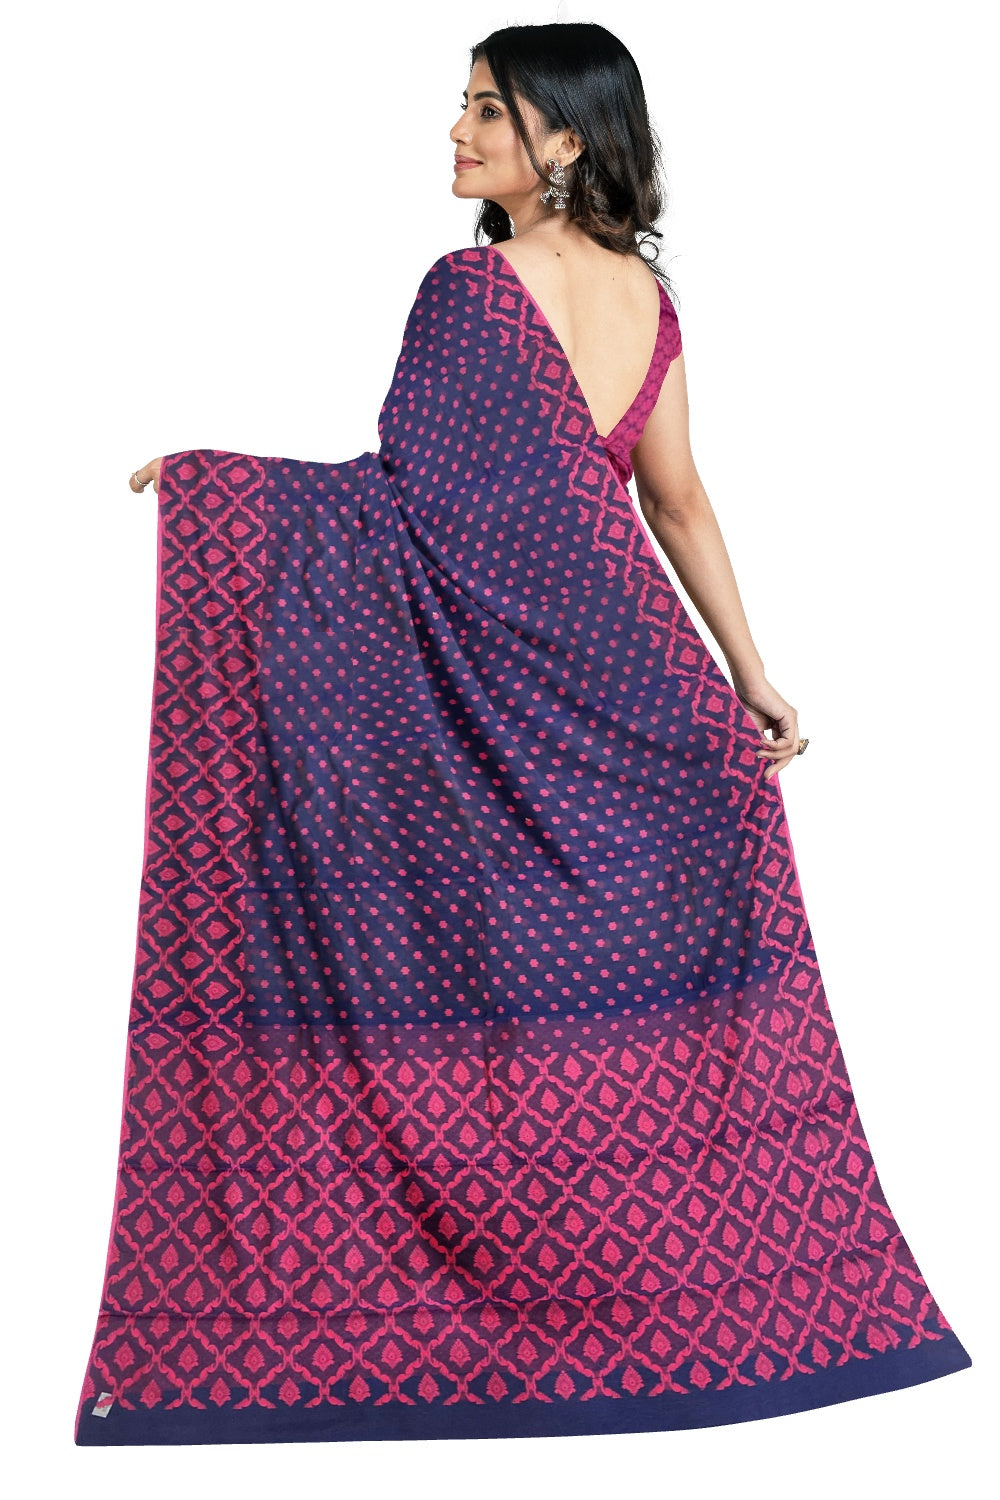 Southloom Sico Gadwal Semi Silk Saree in Dark Blue and Violet with Floral Motifs (Blouse Piece with Work)